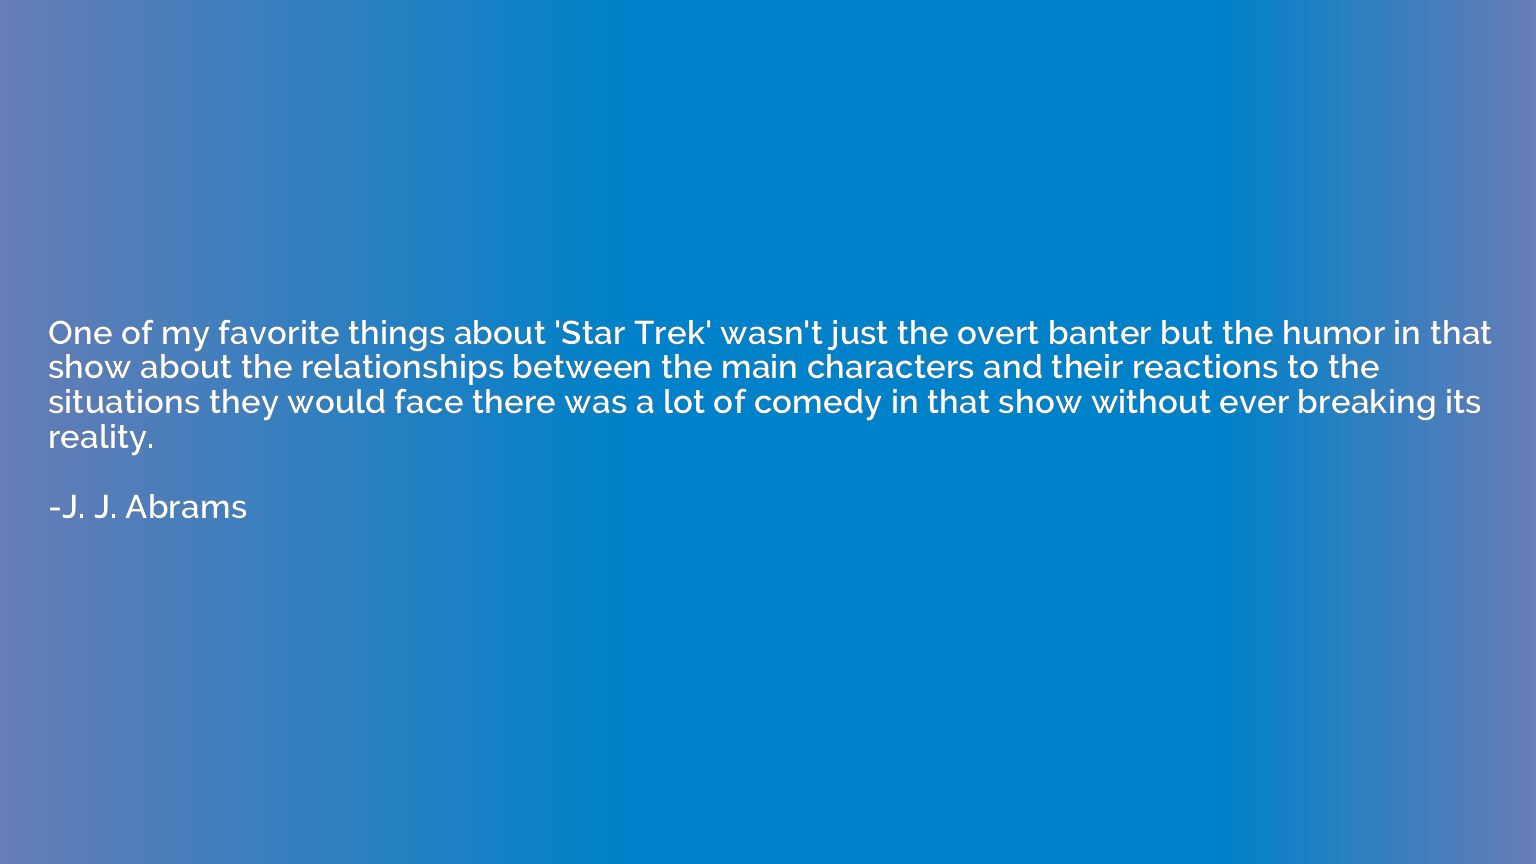 One of my favorite things about 'Star Trek' wasn't just the 